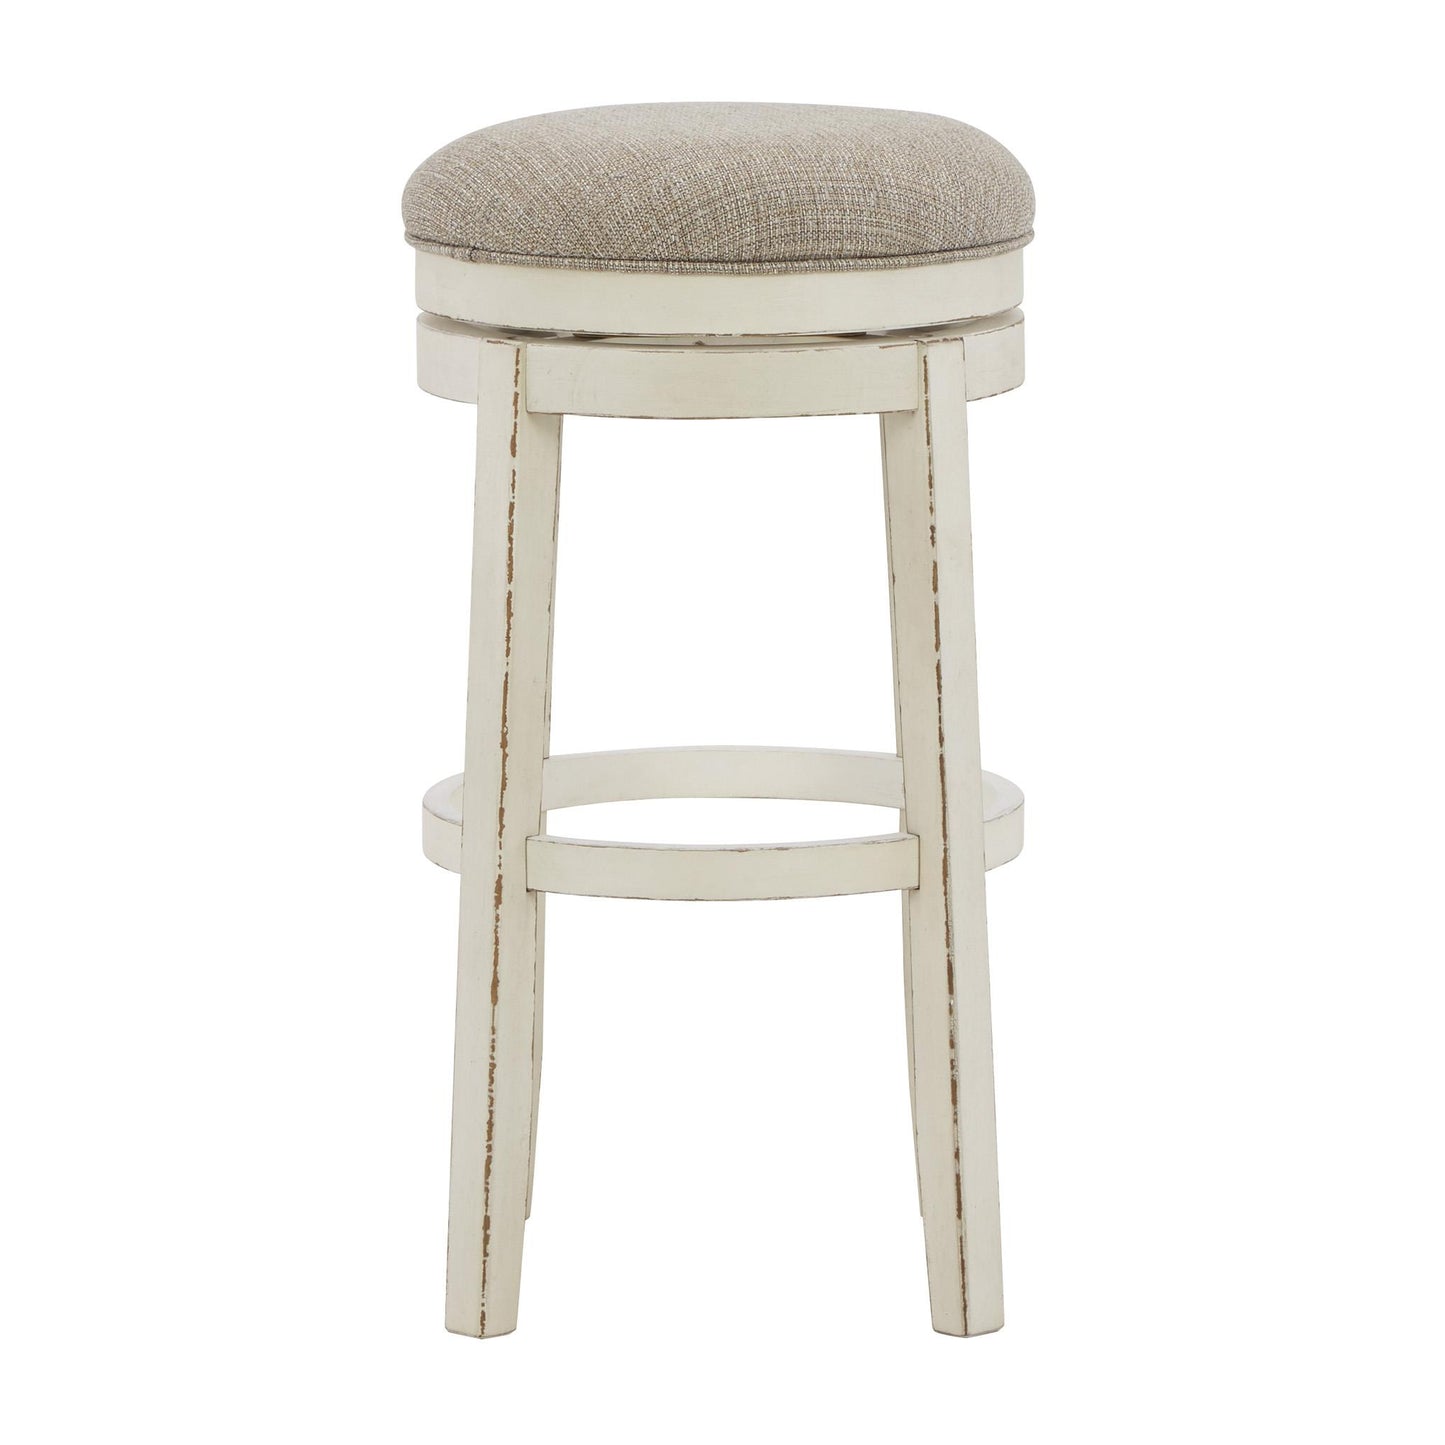 Signature Design by Ashley Realyn Pub Height Stool D743-030 IMAGE 2